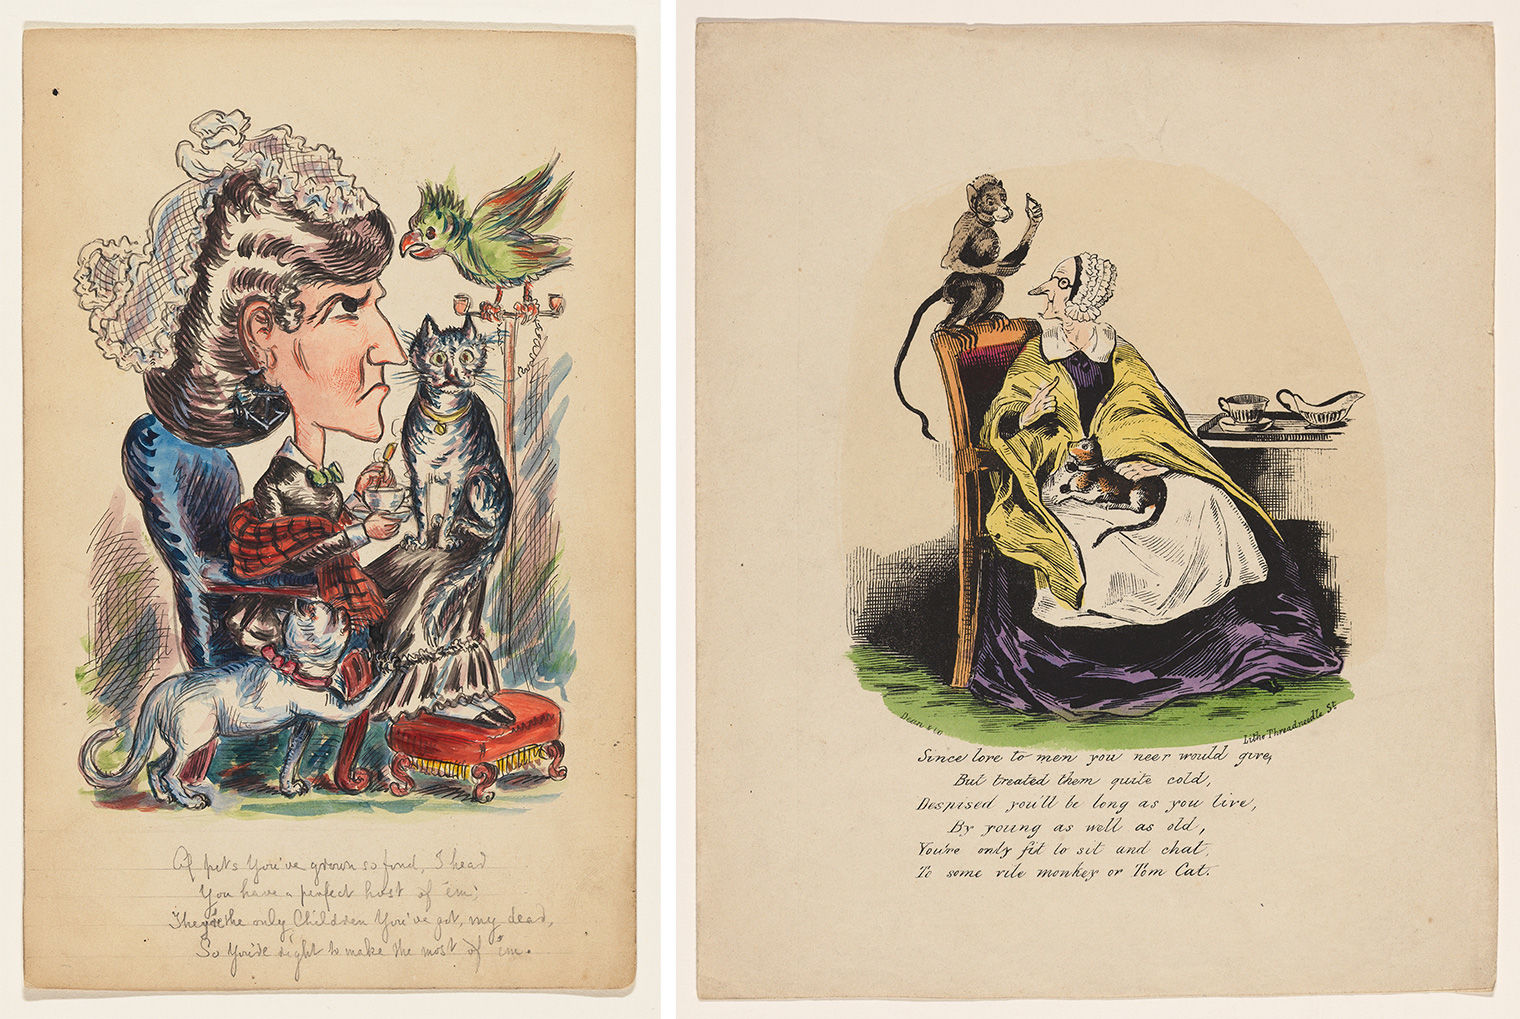 At left, a frowning, elderly woman sits in a chair, surrounded by a green parrot and two cats at her knees and skirt, respectively. At right, an elderly woman sits with a cat in her lap, looking upwards at a monkey on the back of her chair.